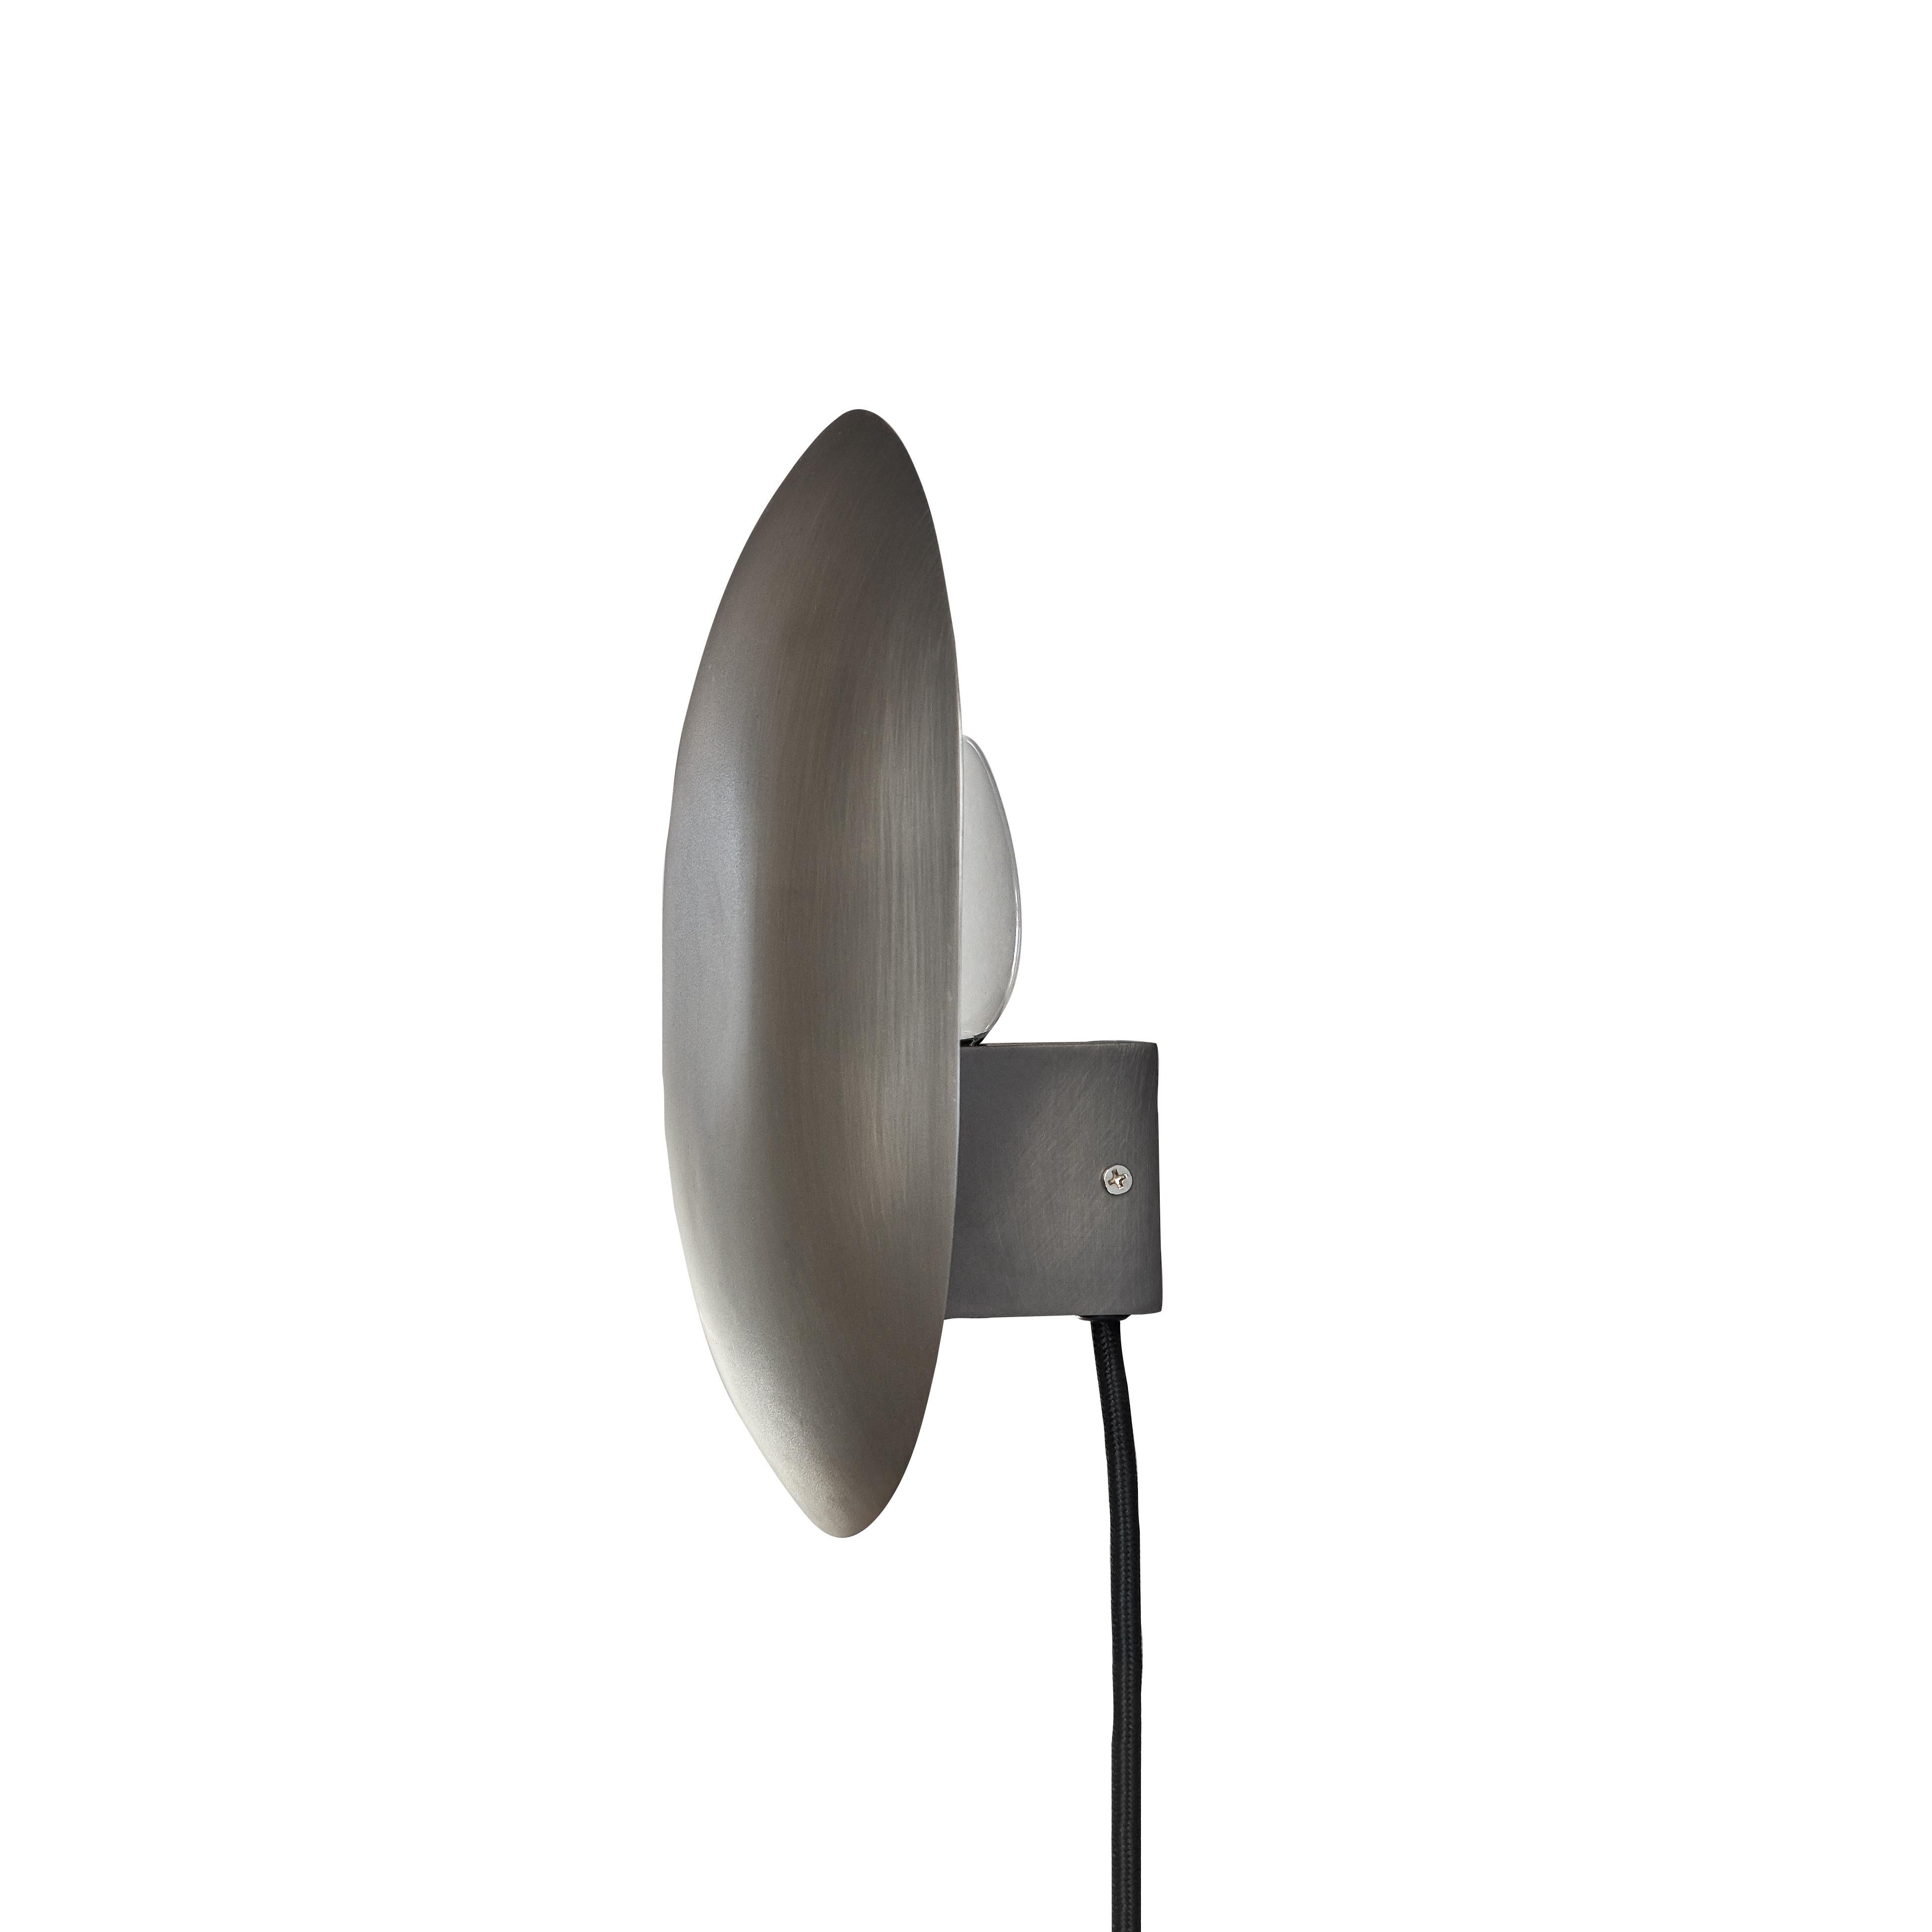 Zink clam wall lamp by 101 Copenhagen
Designed by Kristian Sofus Hansen & Tommy Hyldahl
Dimensions: L 14 x W 22 x H 26 cm
Cable length: 170 cm
This product is not wired for USA
Materials: metal: plated metal / zink
Cable: fabric covered cable /